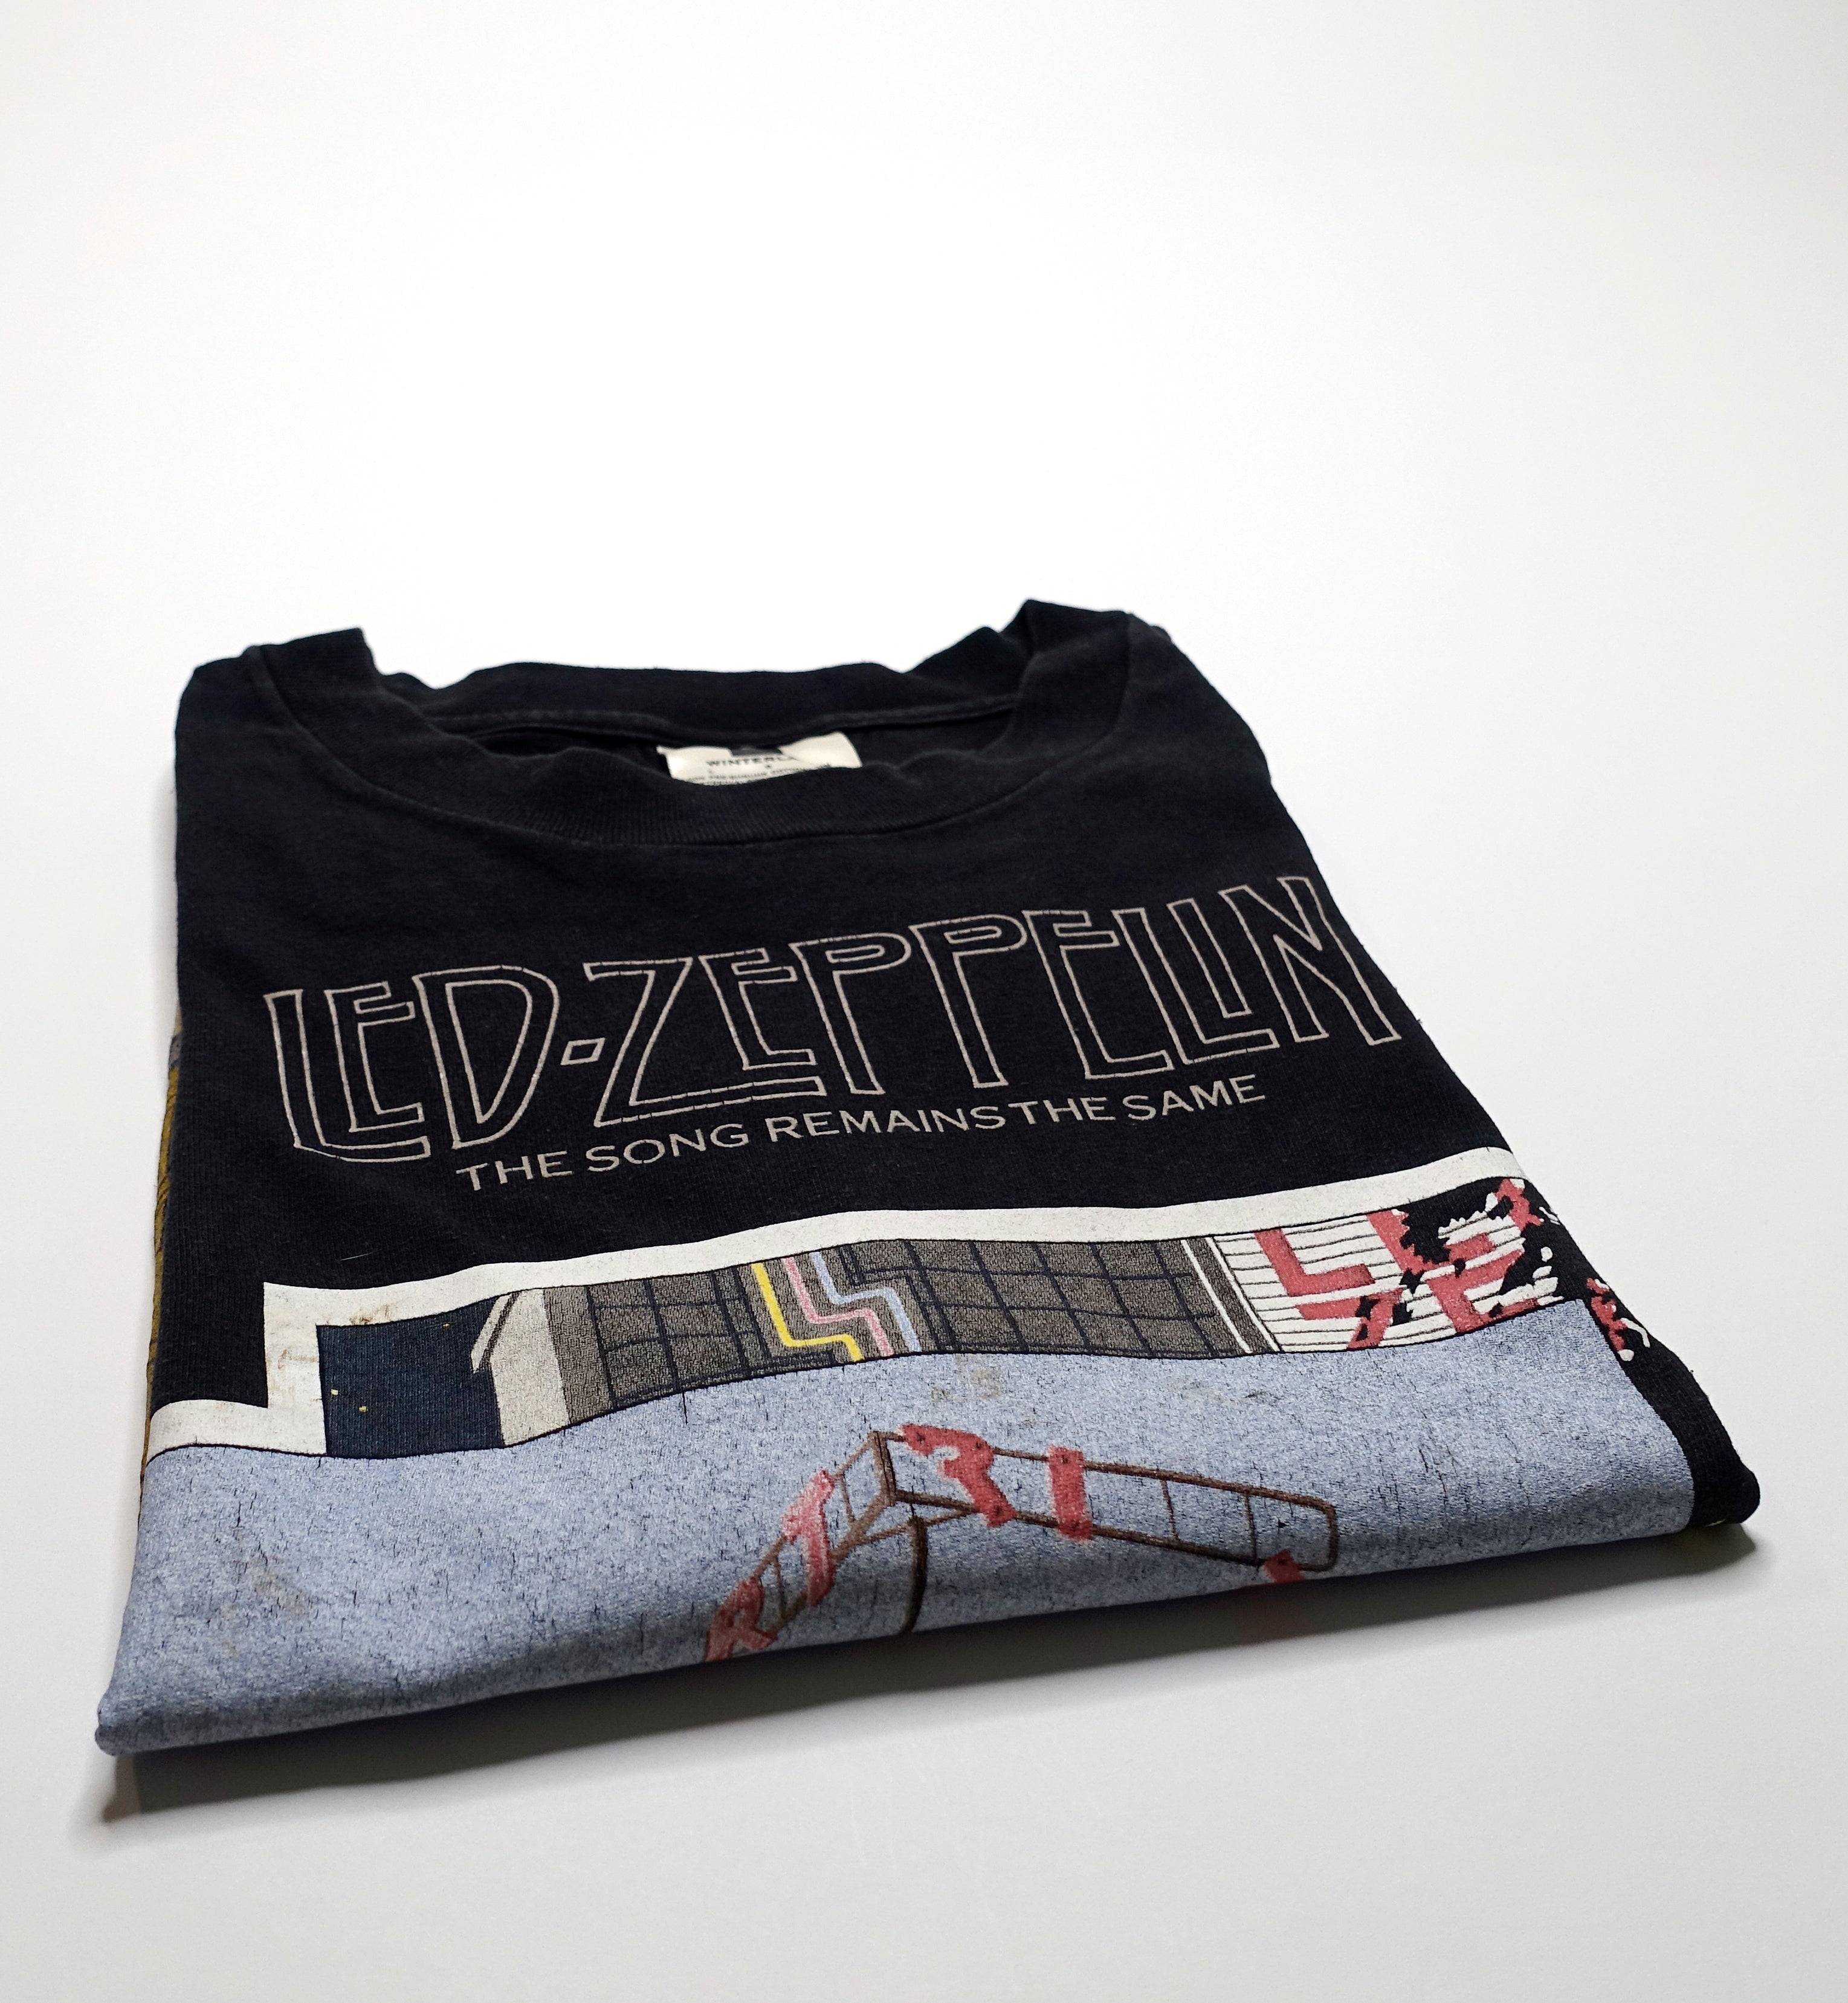 Led Zeppelin - Song Remains The Same Winterland Shirt Size Large